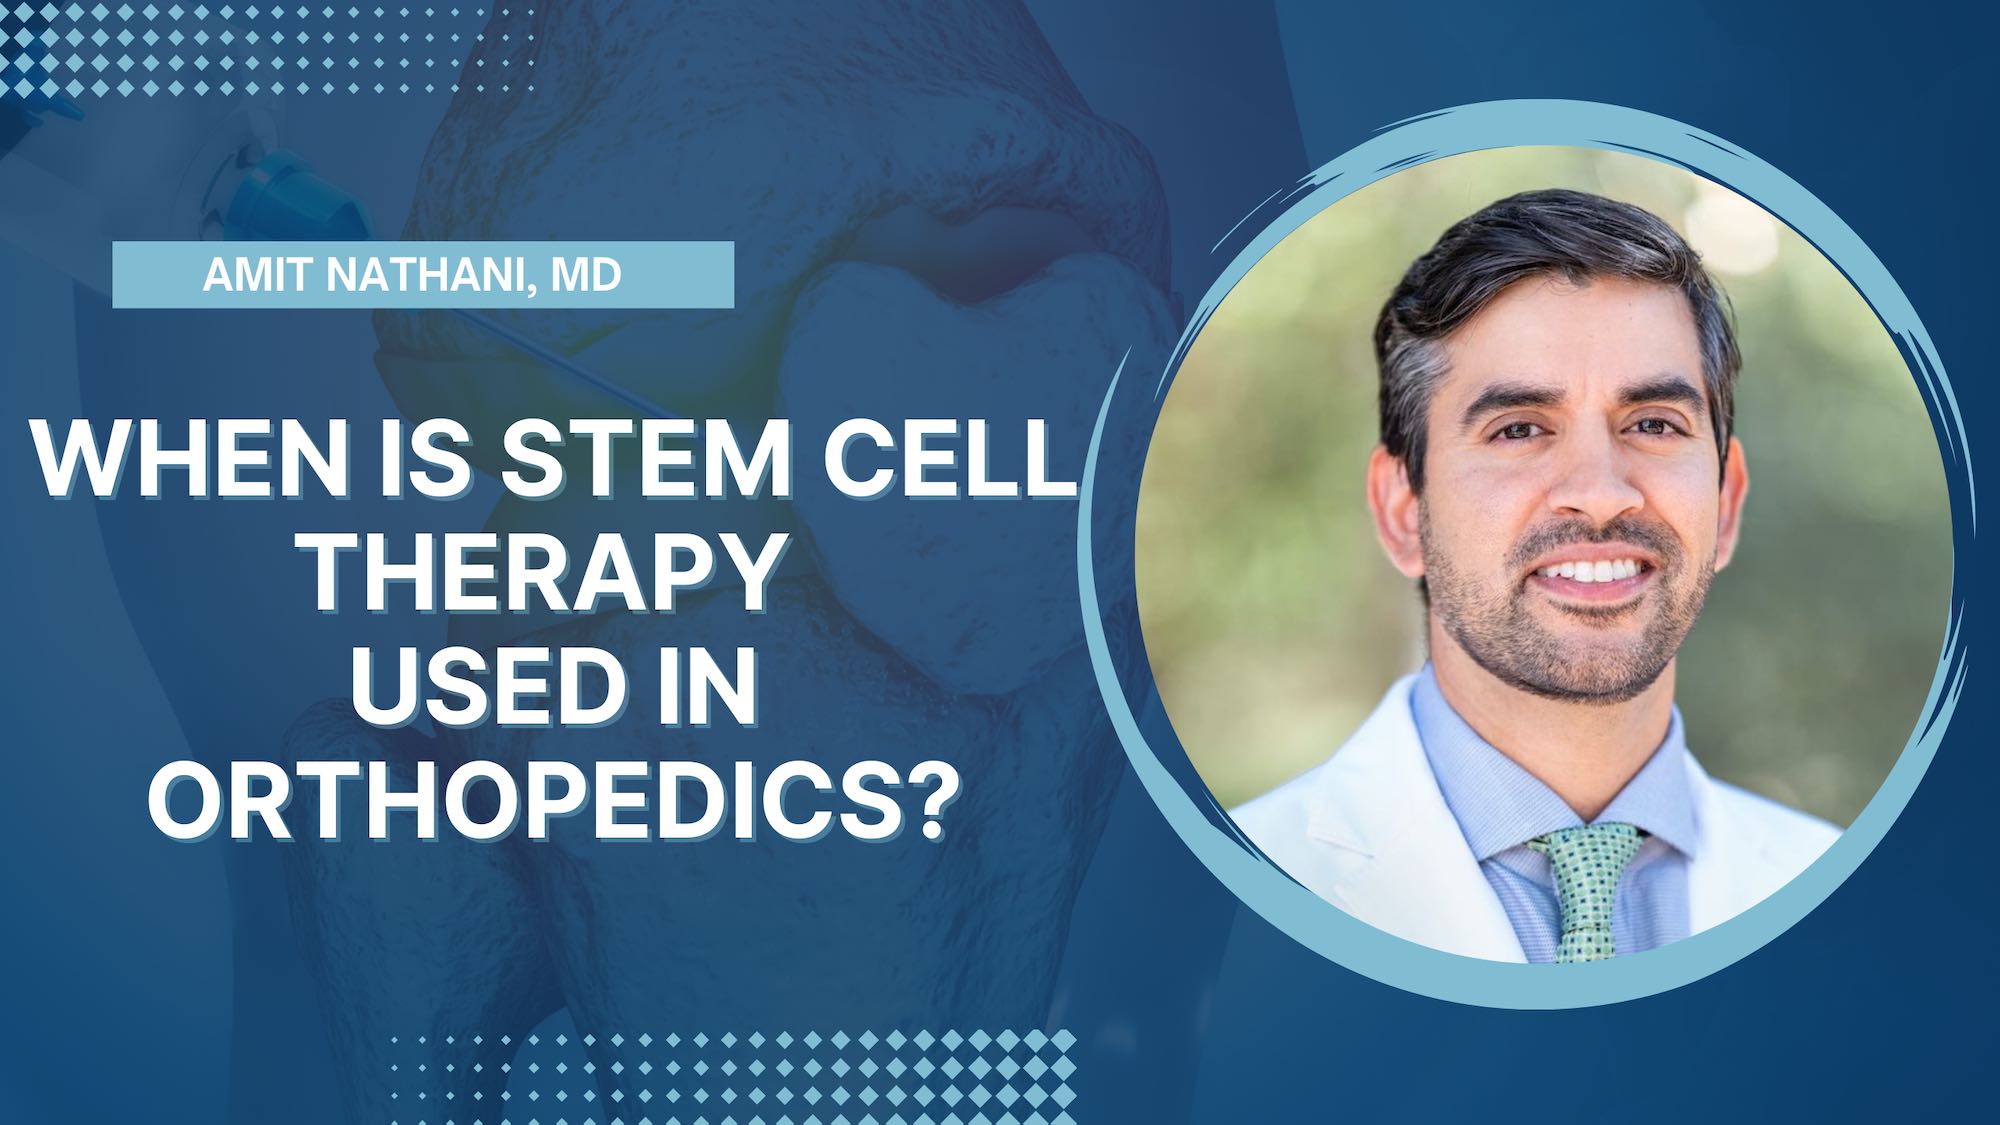 Dr. Nathani explaining when stem cells are used in orthopedics